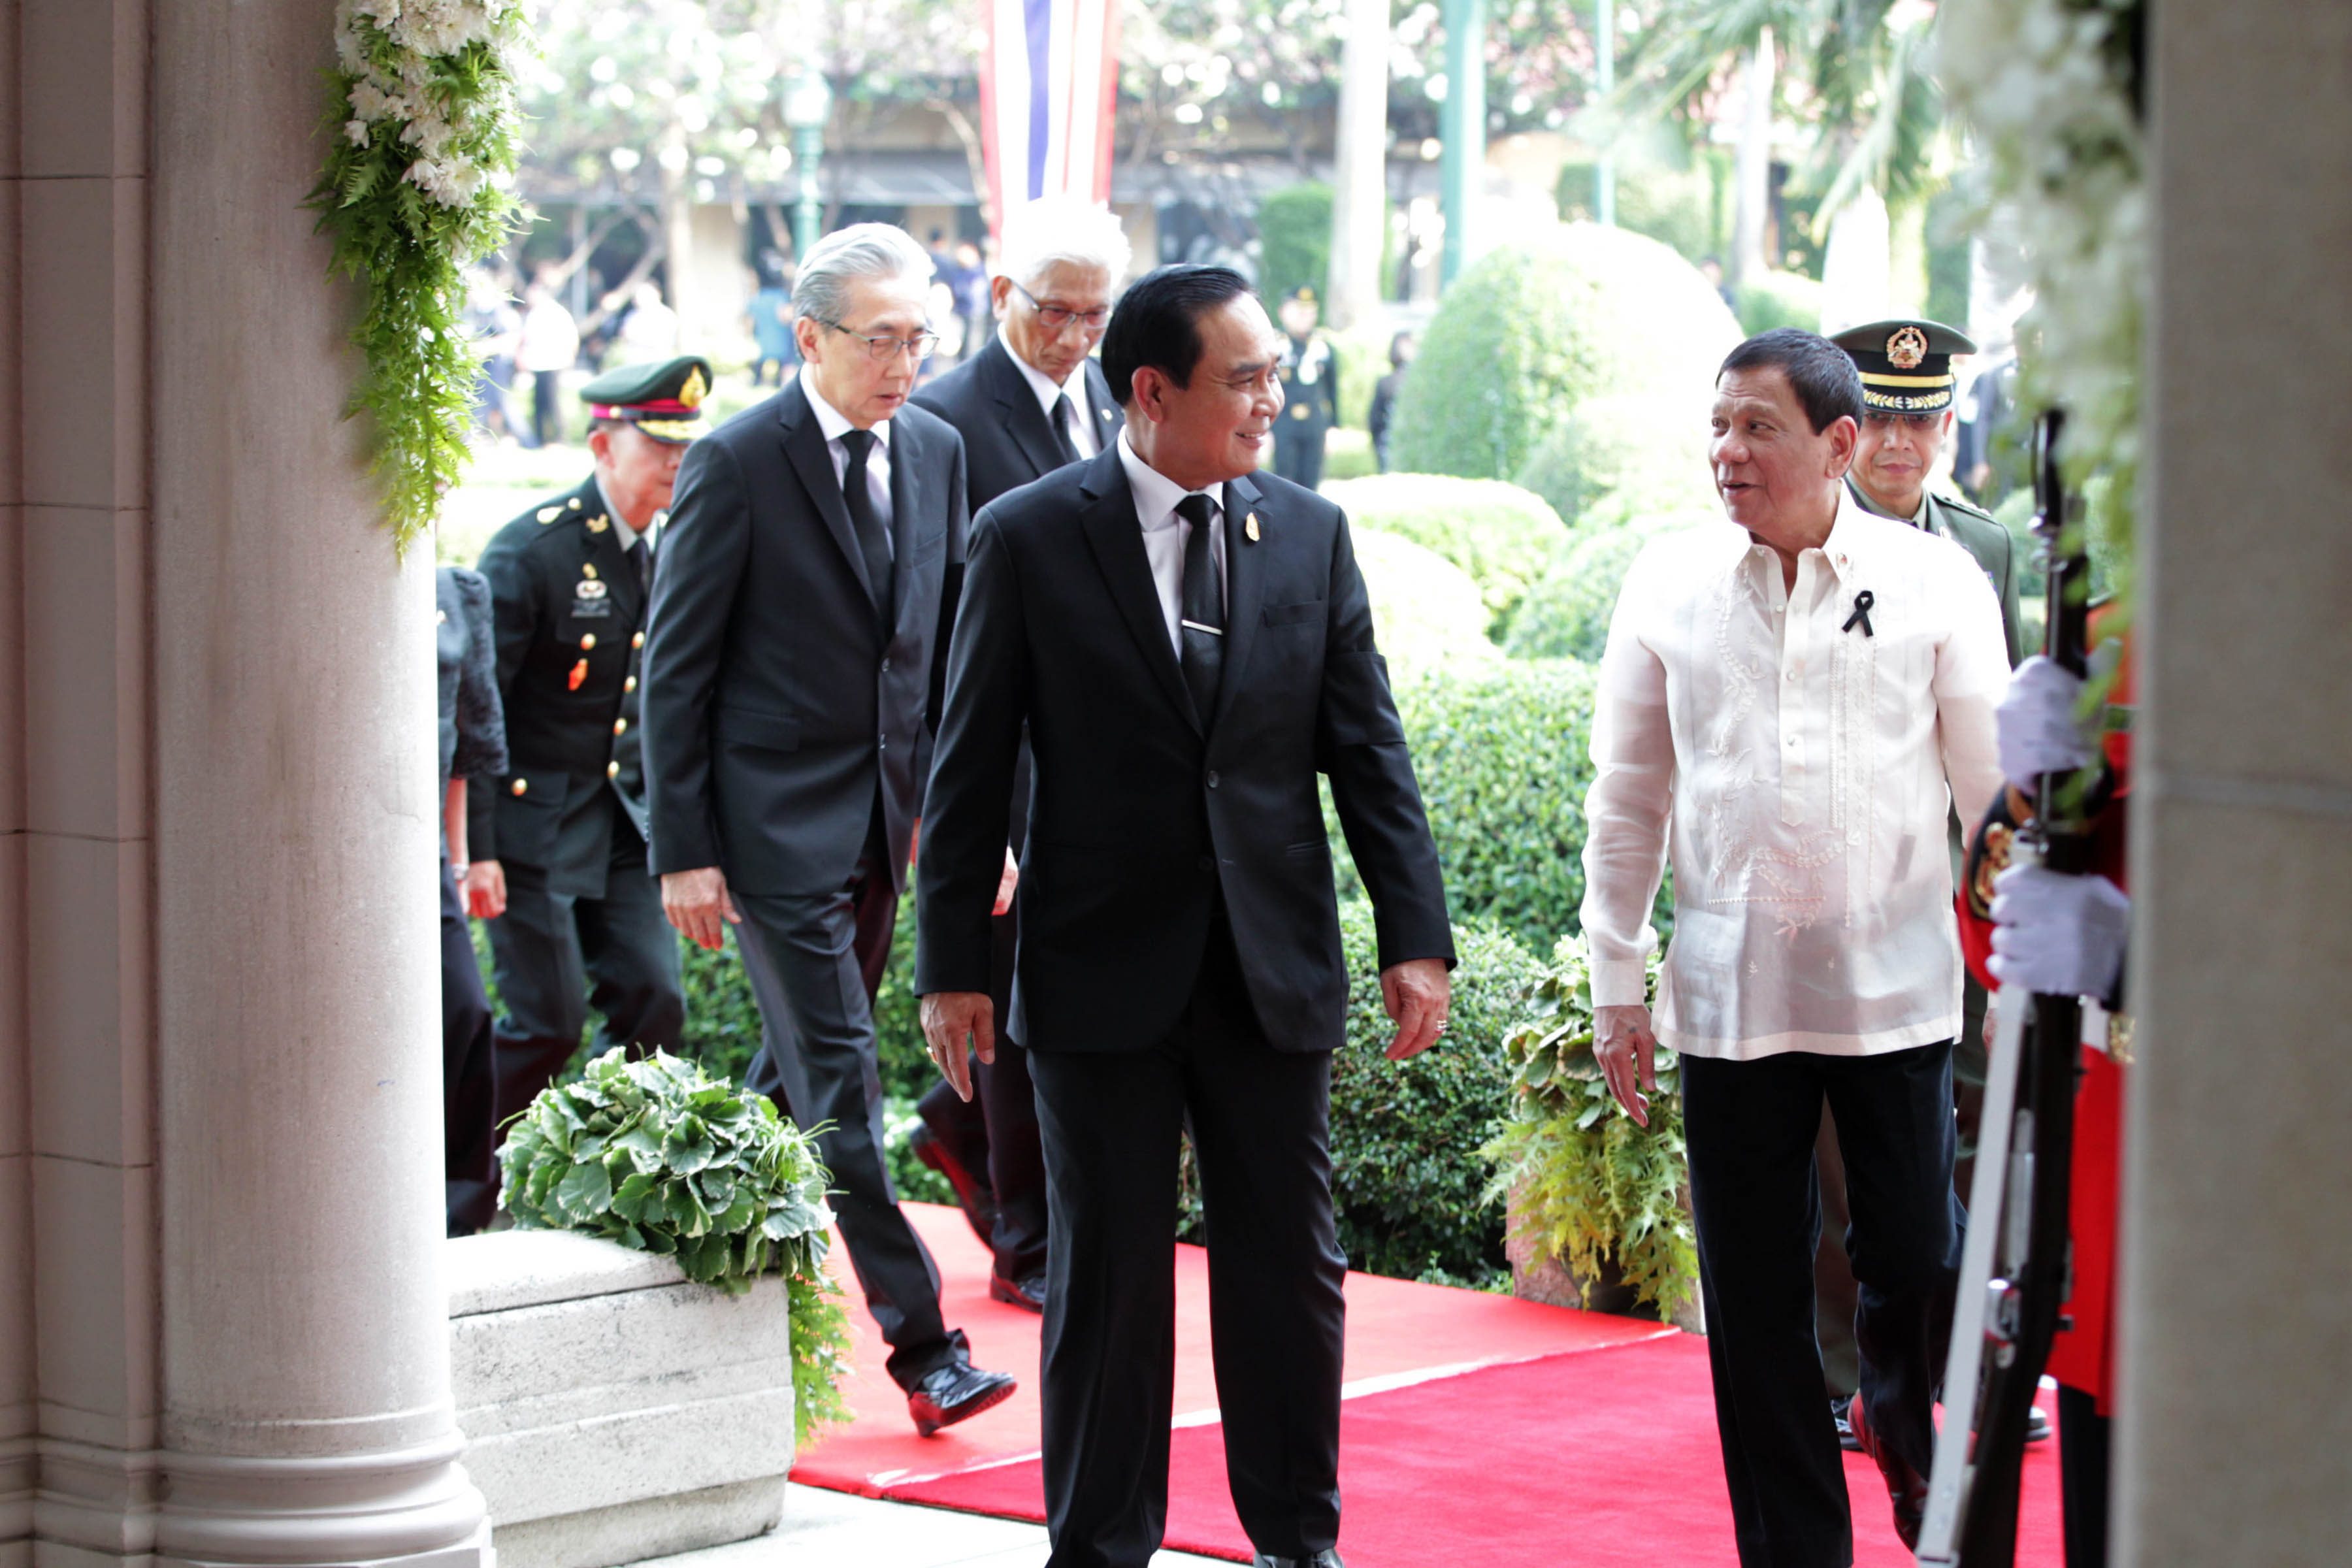 TWO LEADERS. President Rodrigo Duterte is accompanied by Thailand Prime Minister General Prayut Chan-o-cha as they enter the Thai Koo Fah Building of the Government House in Bangkok, Thailand 